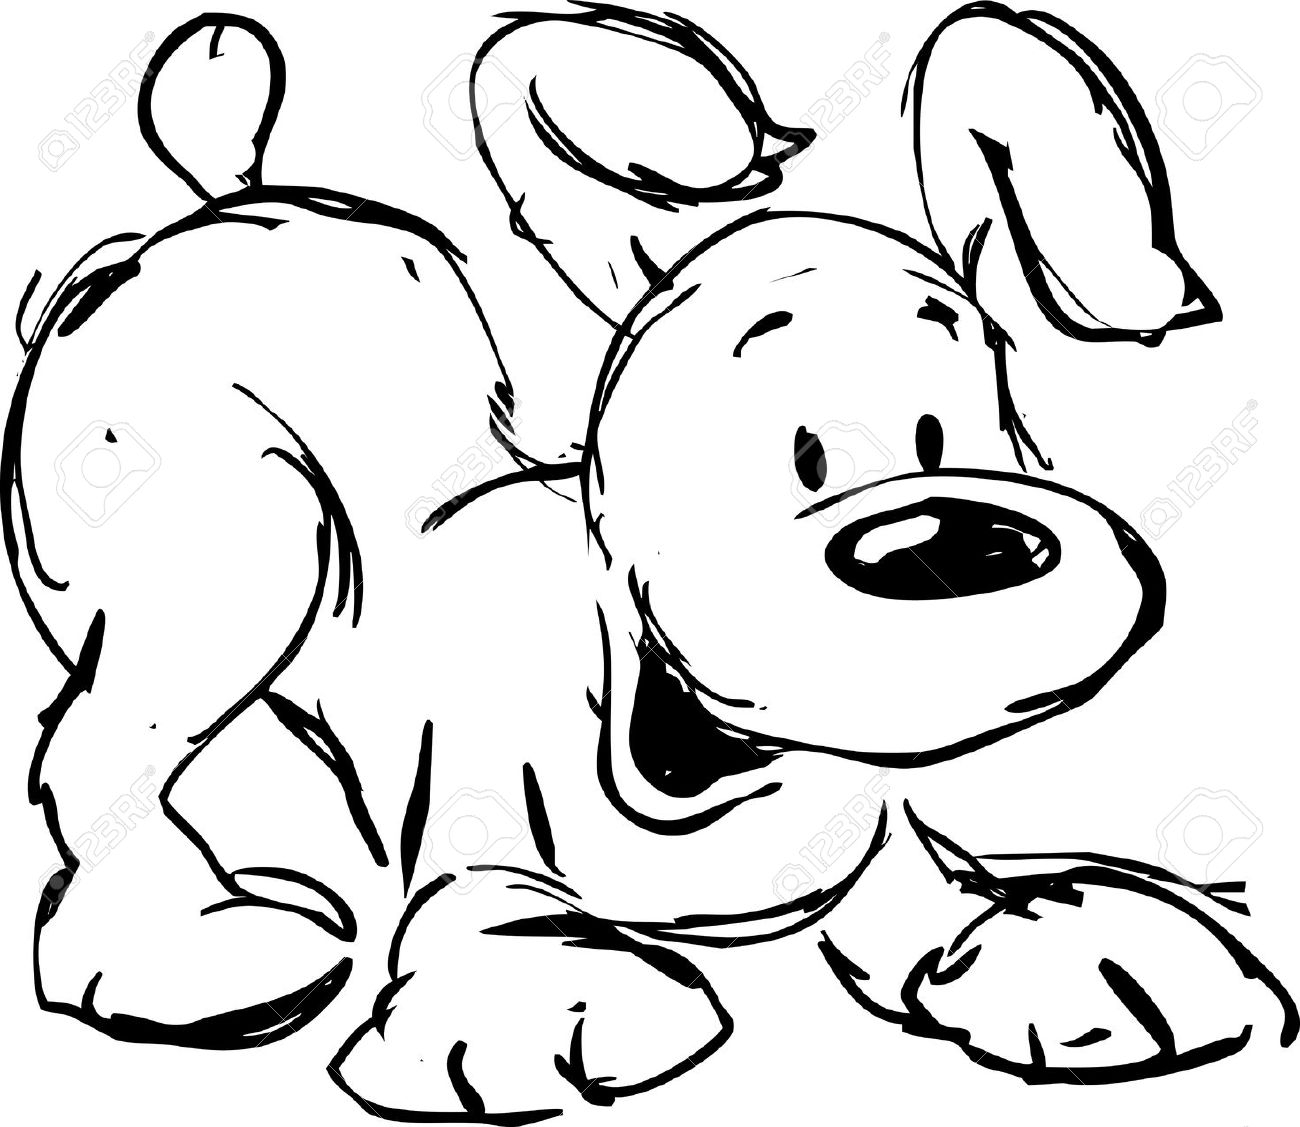 Cute black and white dog clipart 